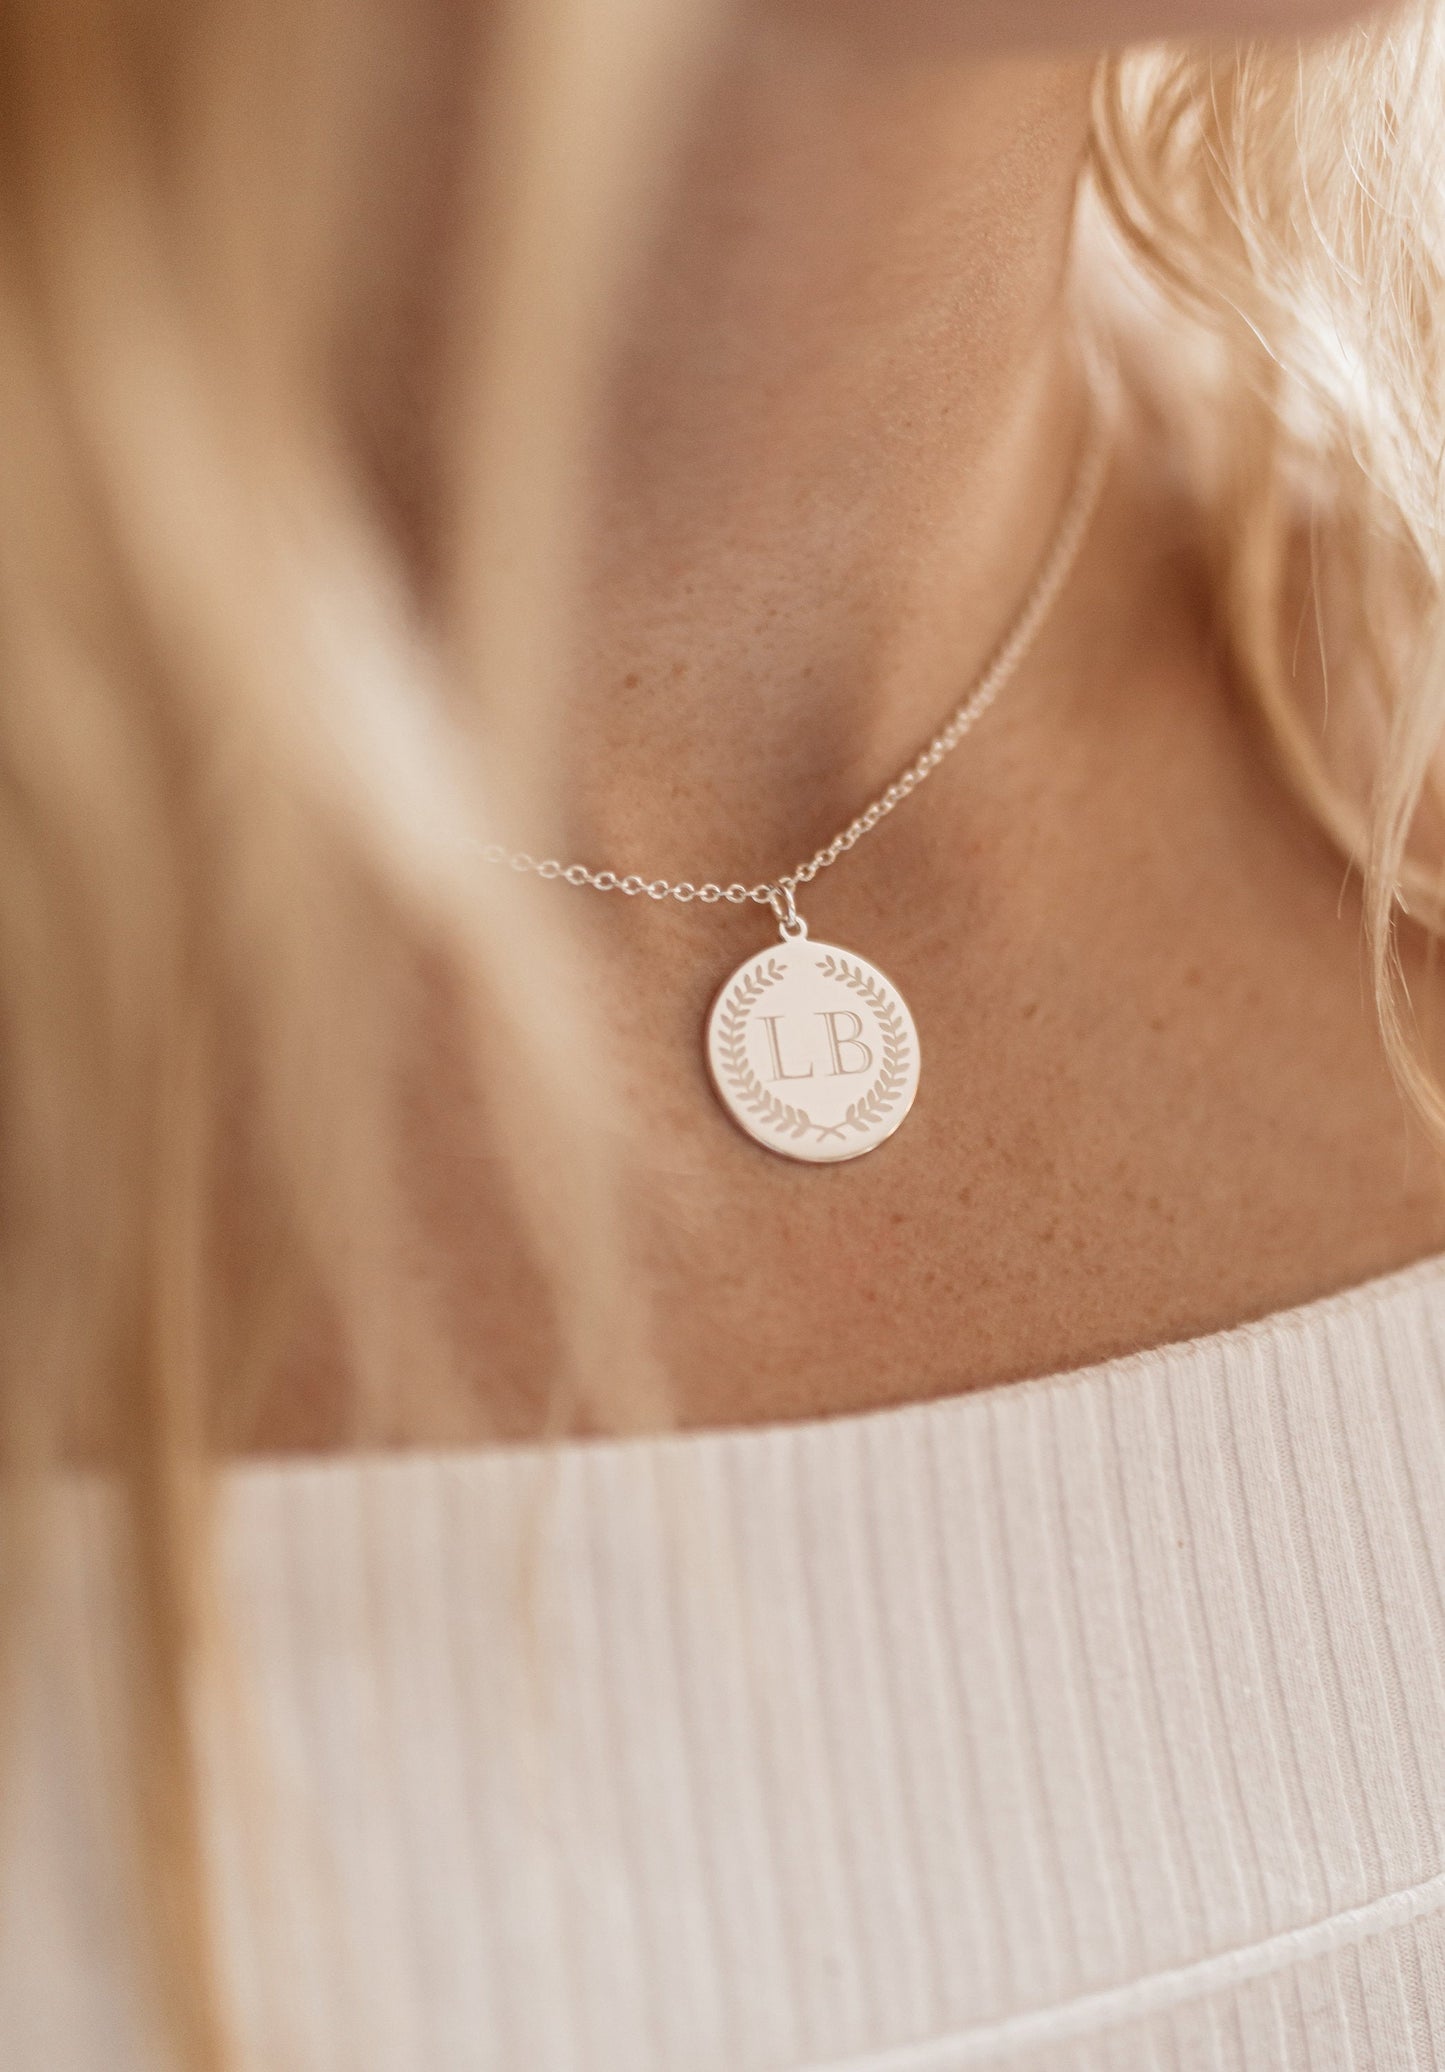 Letter Necklace, Initial Disc Necklace, Rose gold Monogram Necklace, Custom Initial, Personalized Gift, Custom Necklace, Engraved Necklace - Anya Collection